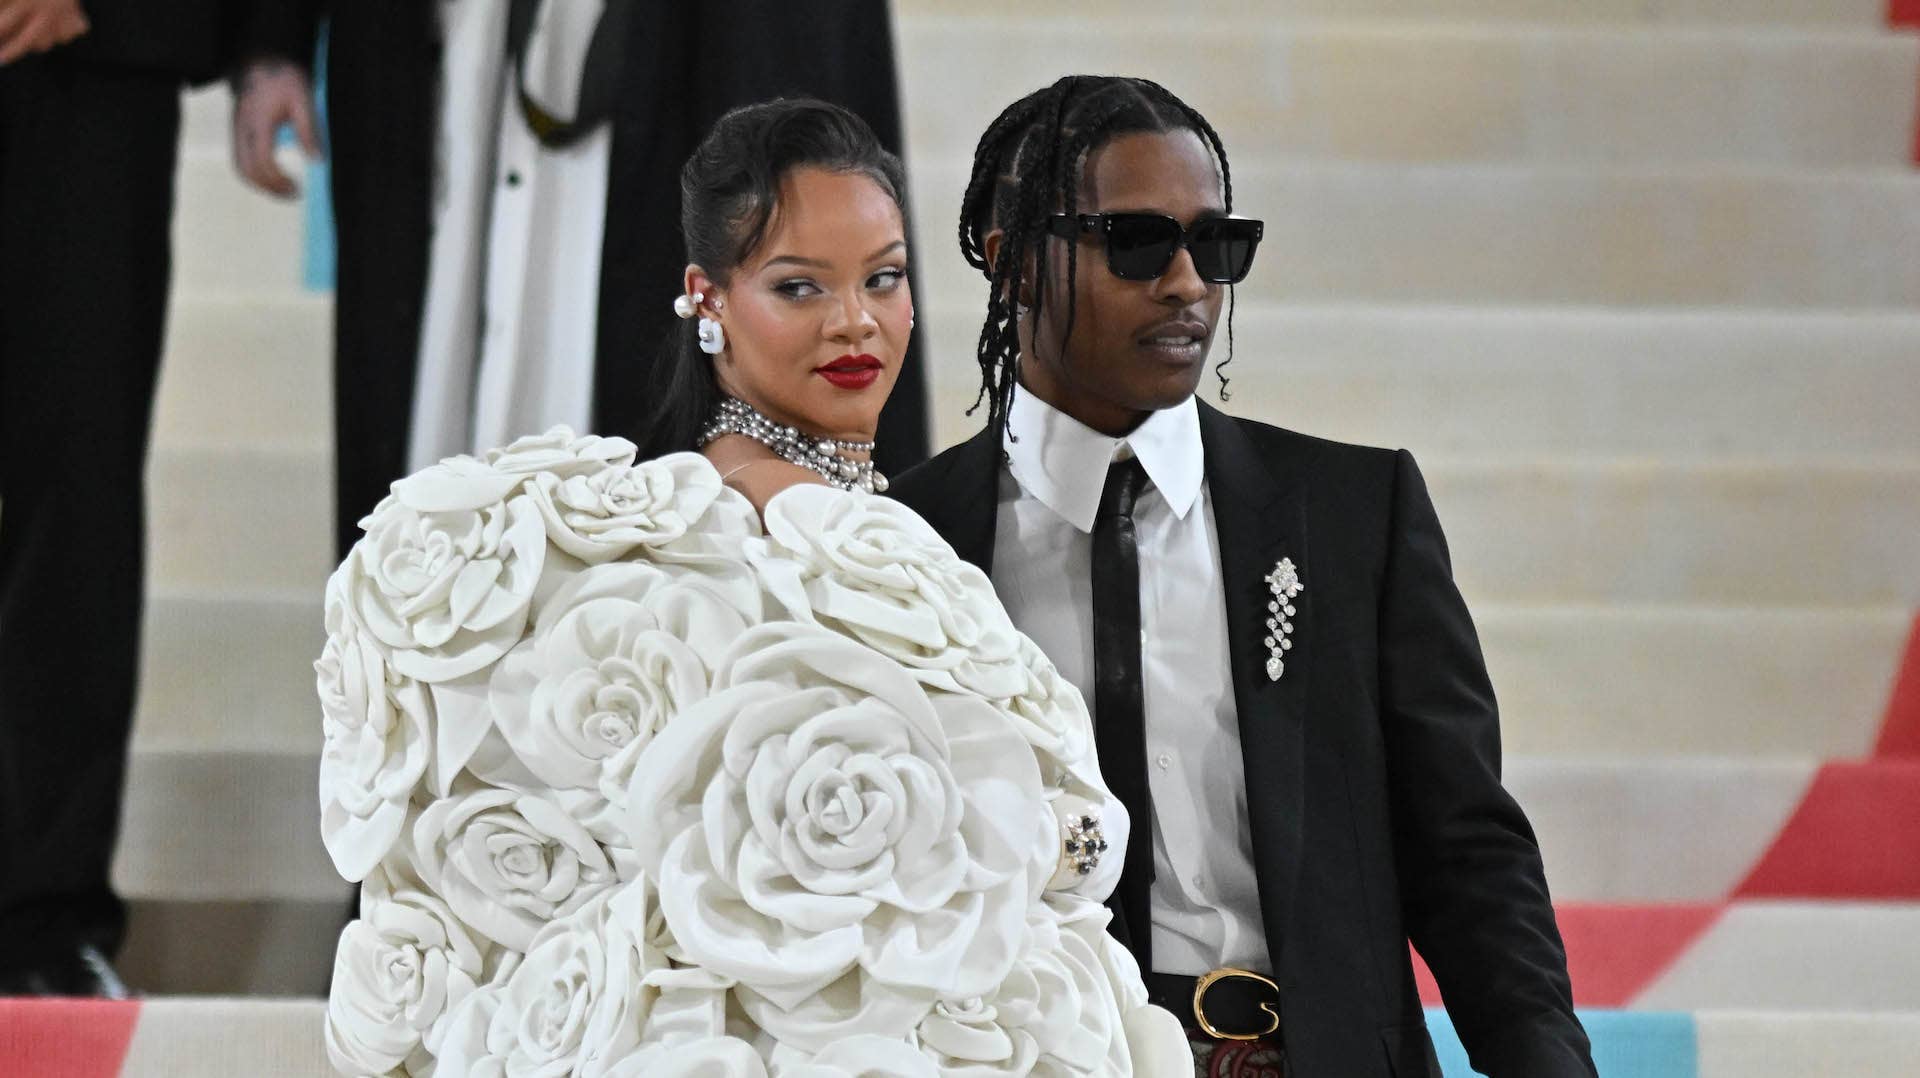 This is an image of Rihanna on the right and A$AP Rocky on the left